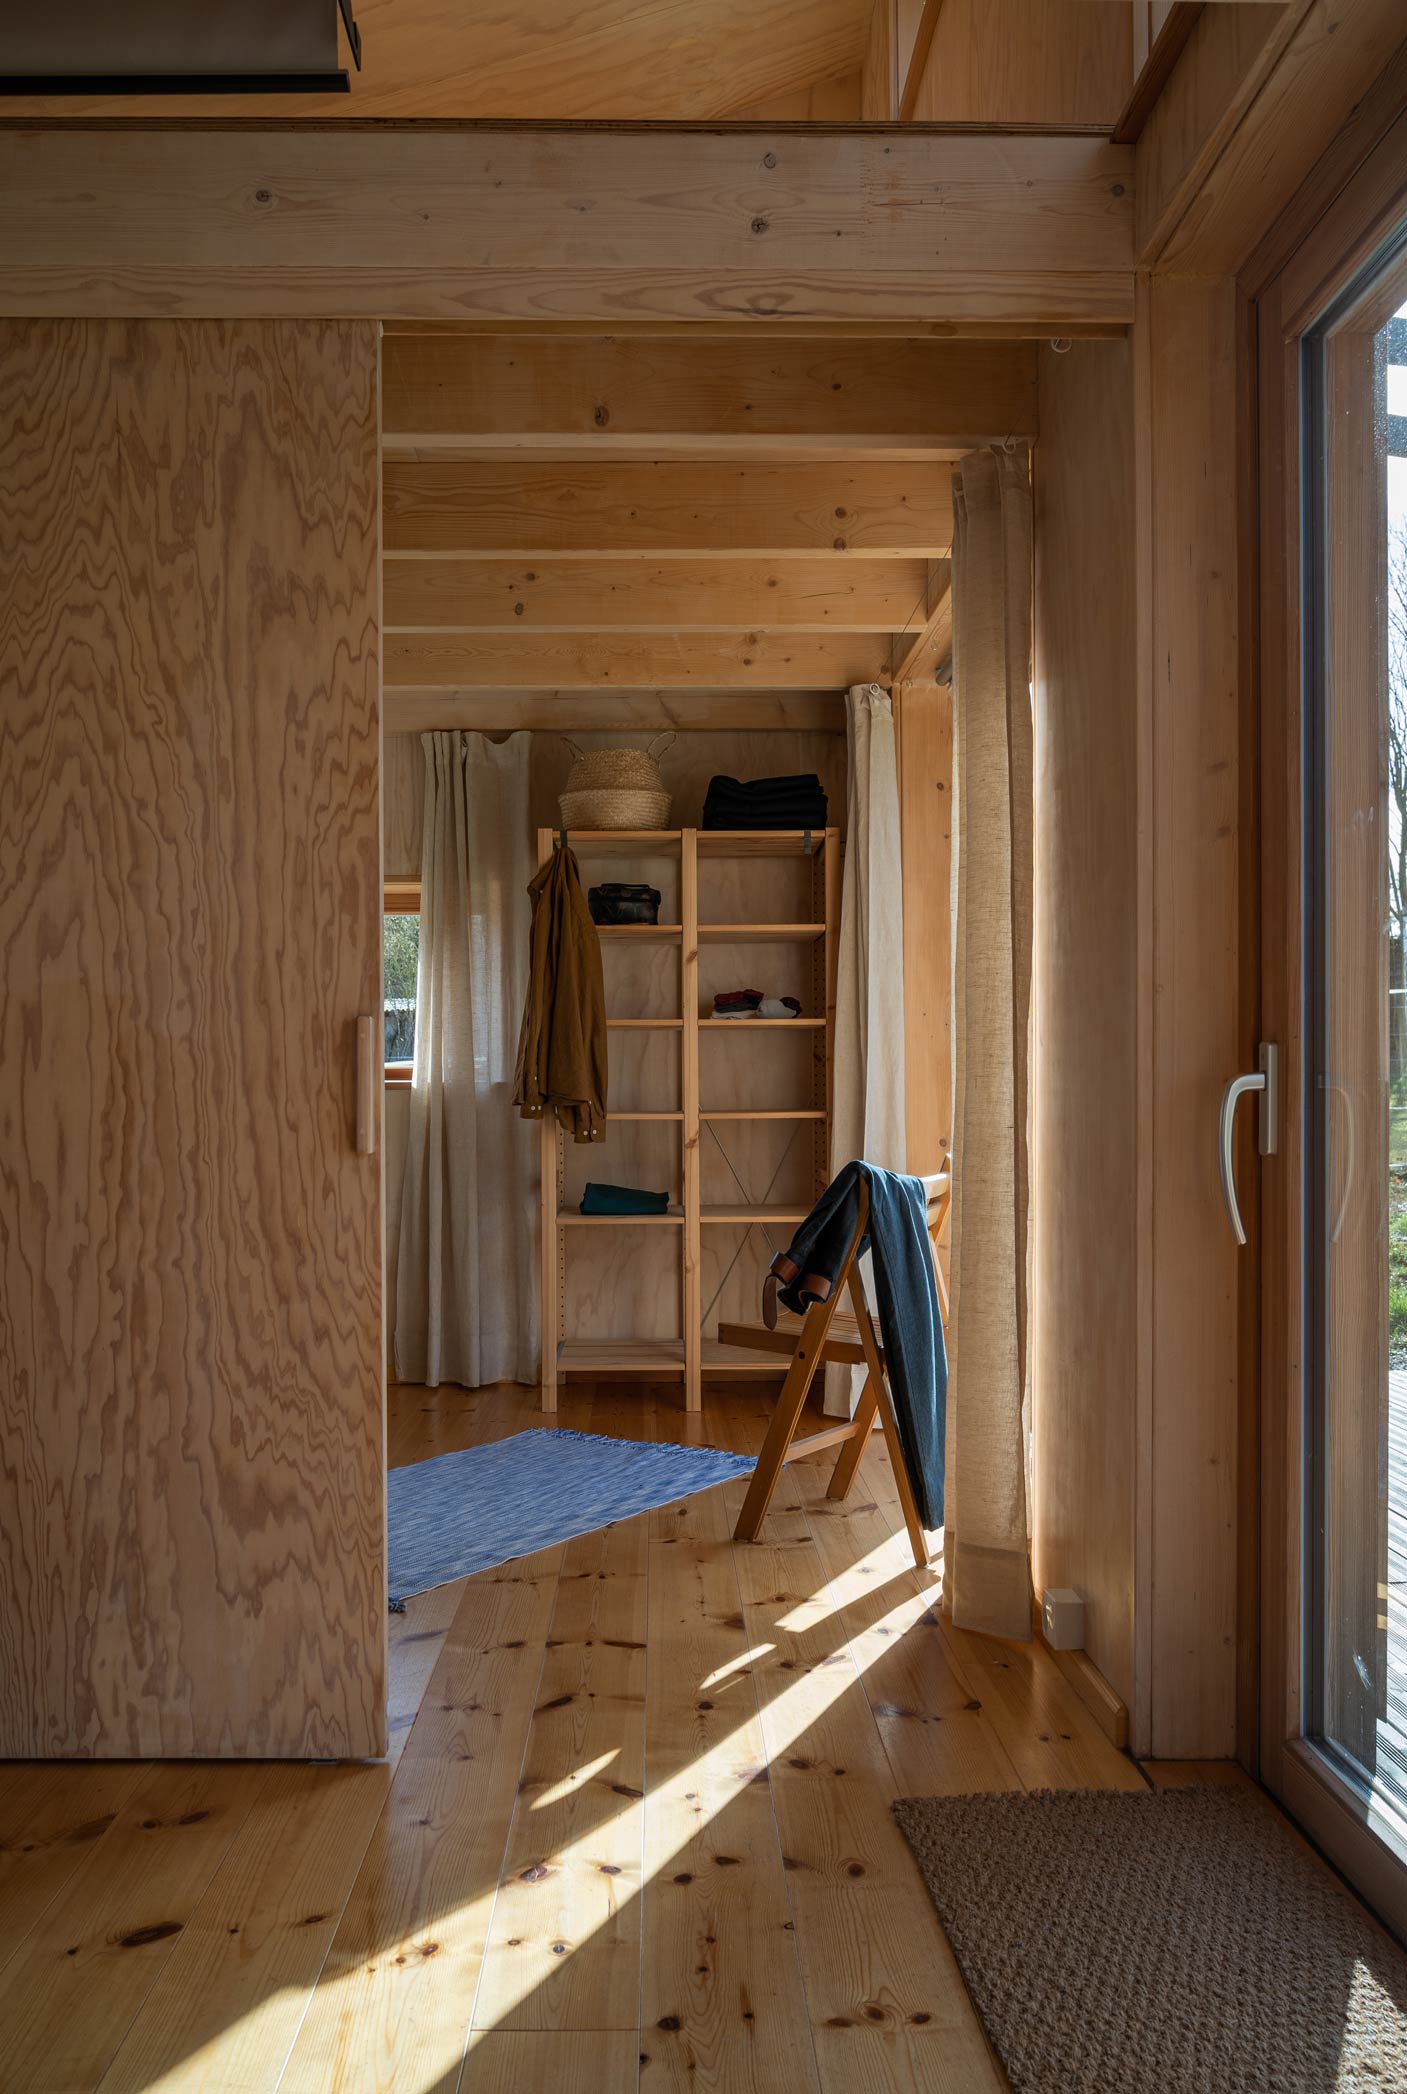 Interior photography of eco friendly wooden cabin in German countryside